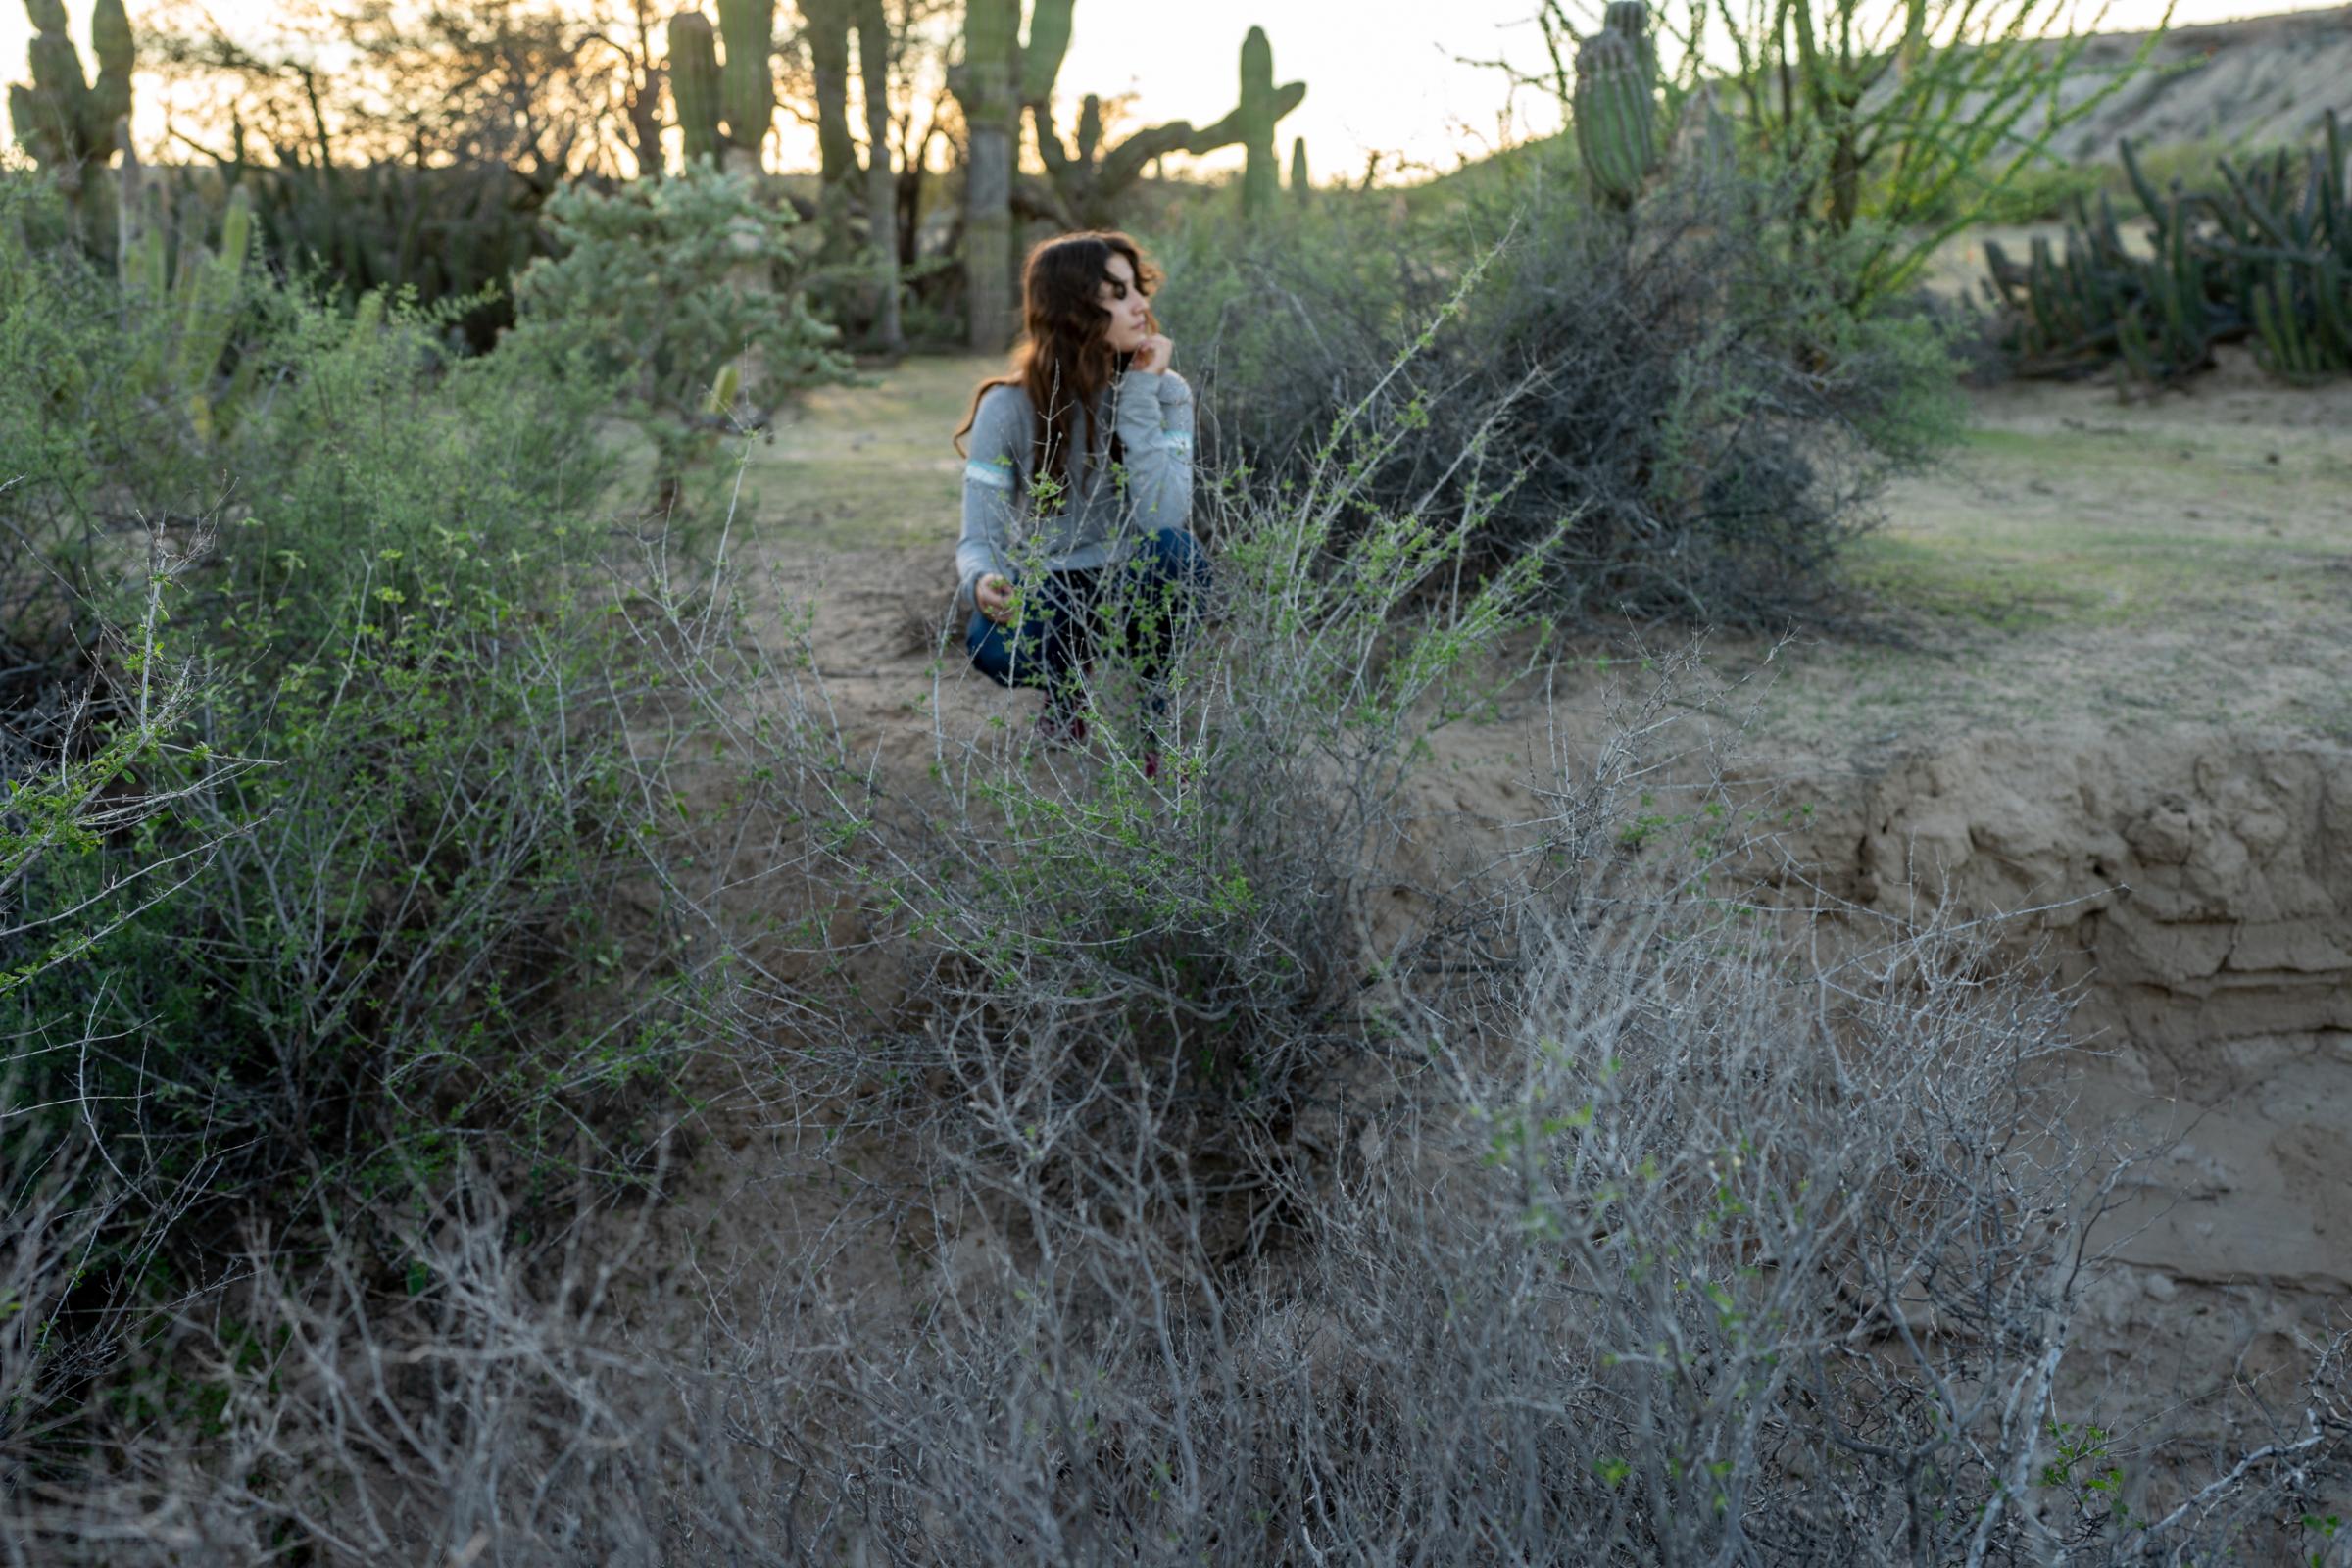 Wider project Until We Are Gone - Dalma walks around the ranch with her mom checking some...